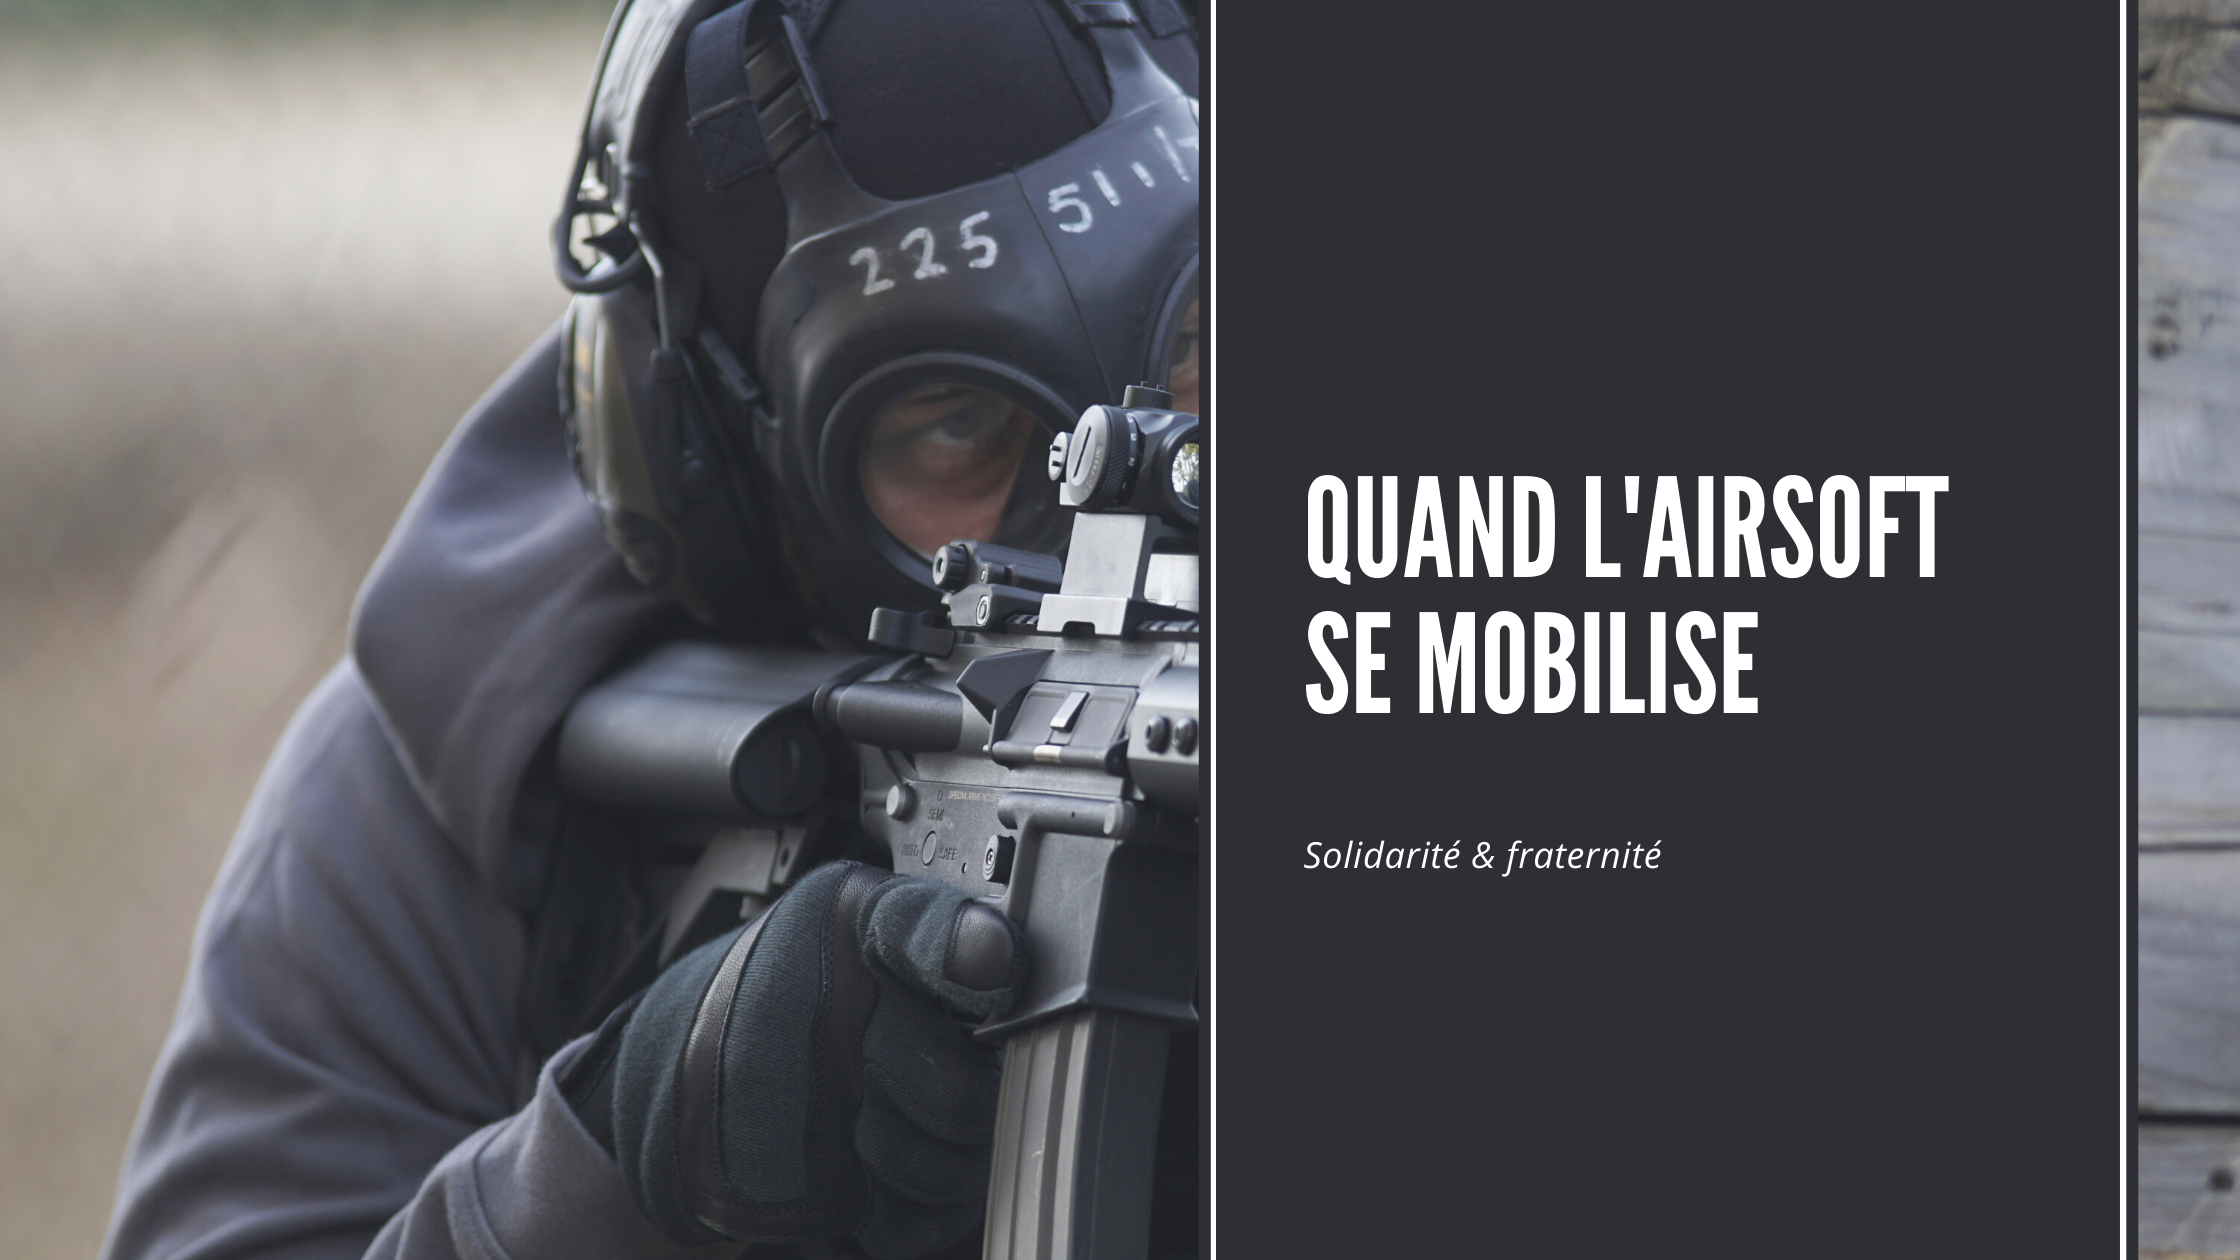 You are currently viewing L’AIRSOFT SE MOBILISE